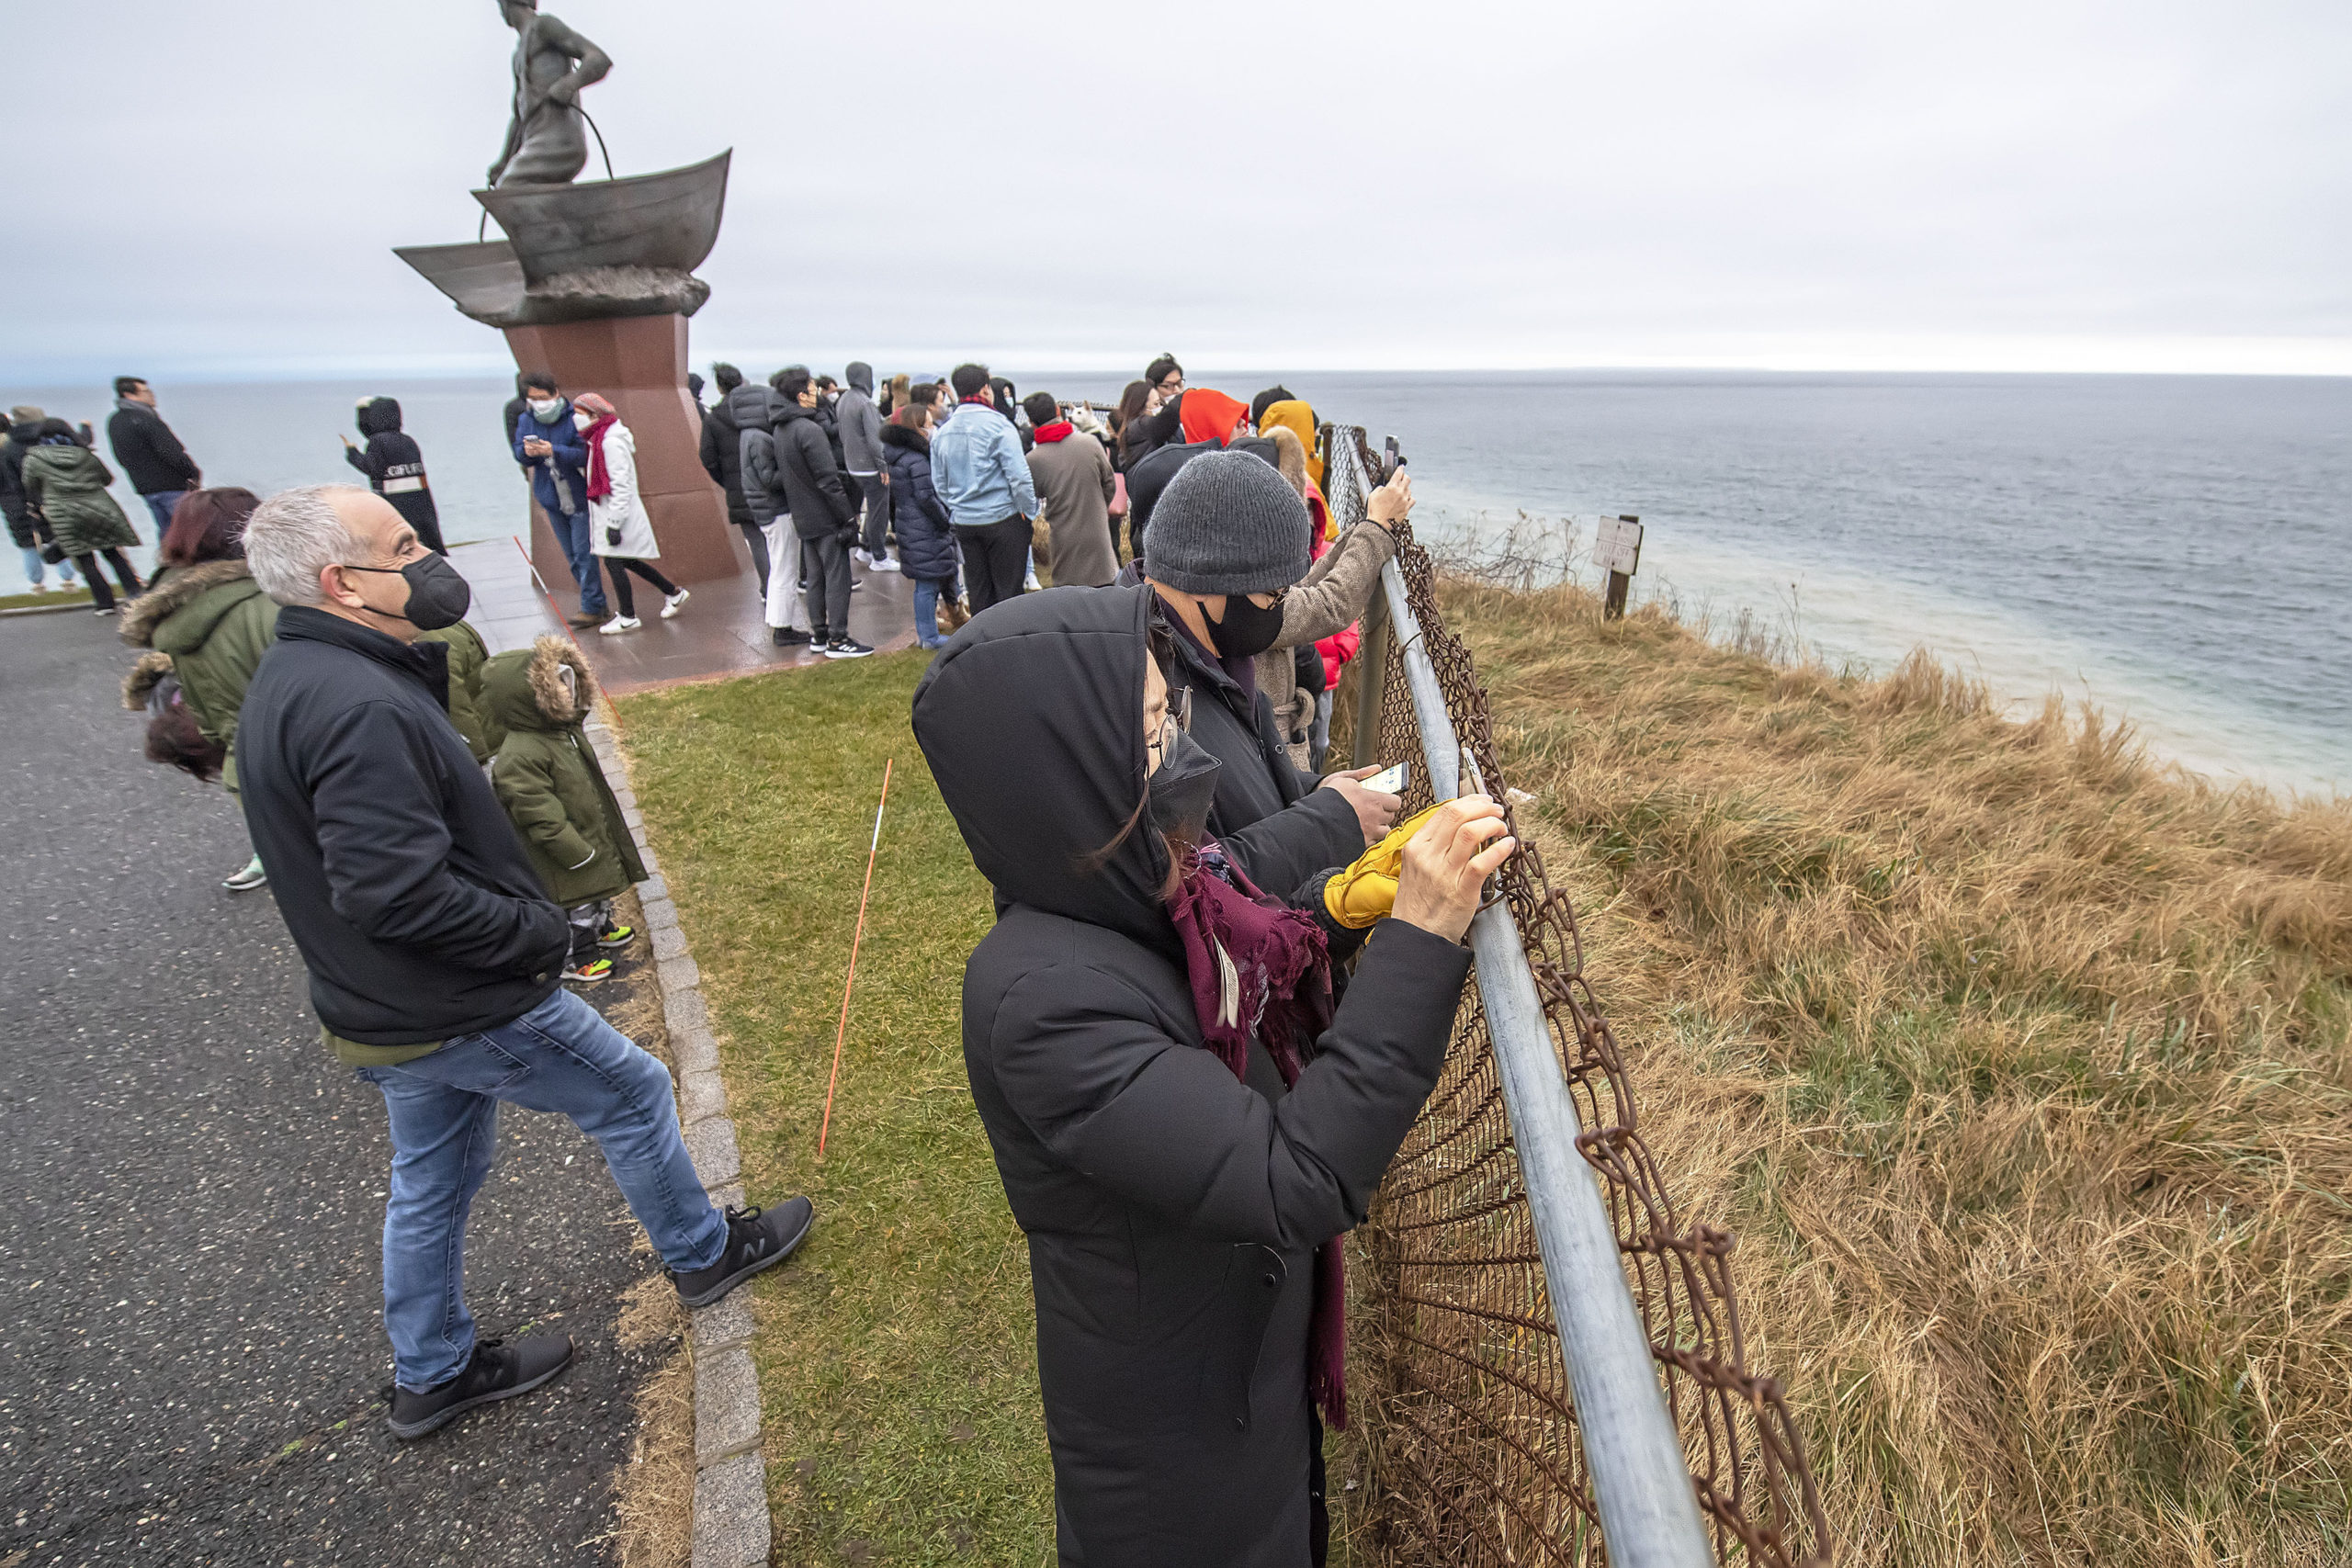 As Southampton Town Supervisor Jay Schneiderman, at left, looks on, Crara Ryu of Bayside, Queens joined a smaller-than usual crowd as she photographs the first sunrise - obscured by fog and clouds, unfortunately - of 2022 as part of a South Korean tradition, which promises good luck and wishes to those who observe it, at the Montauk Lighthouse on New Year's morning.   MICHAEL HELLER